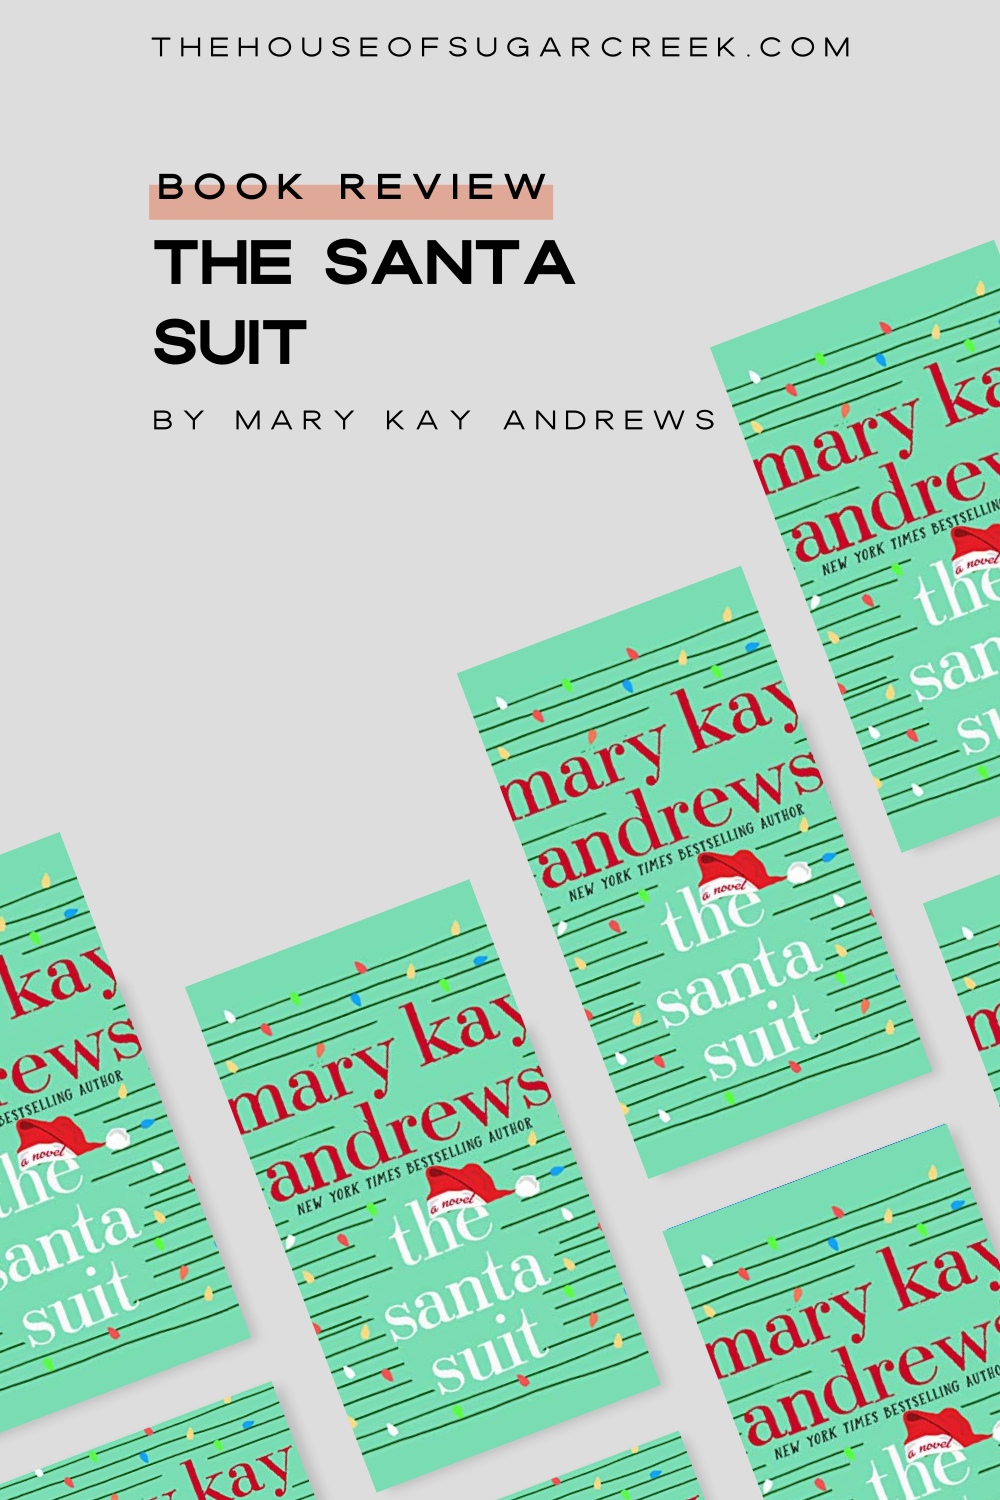 Book Review - The Santa Suit by Mary Kay Andrews